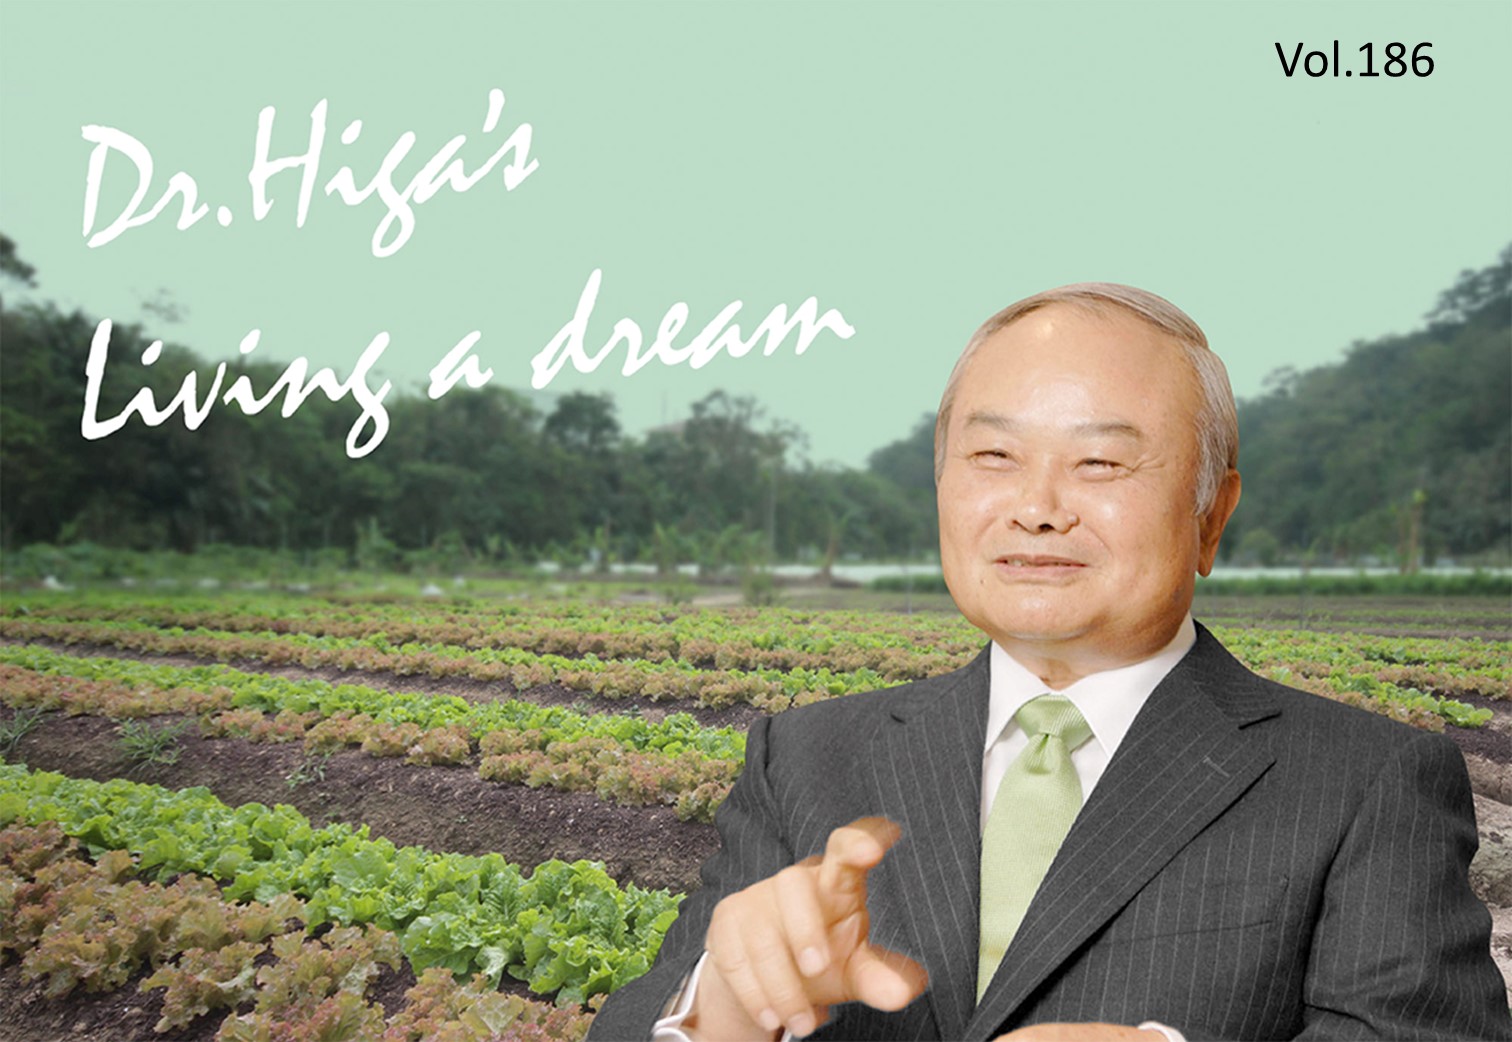 Dr. Higa's "Living a Dream": the latest article #186 is up!!!